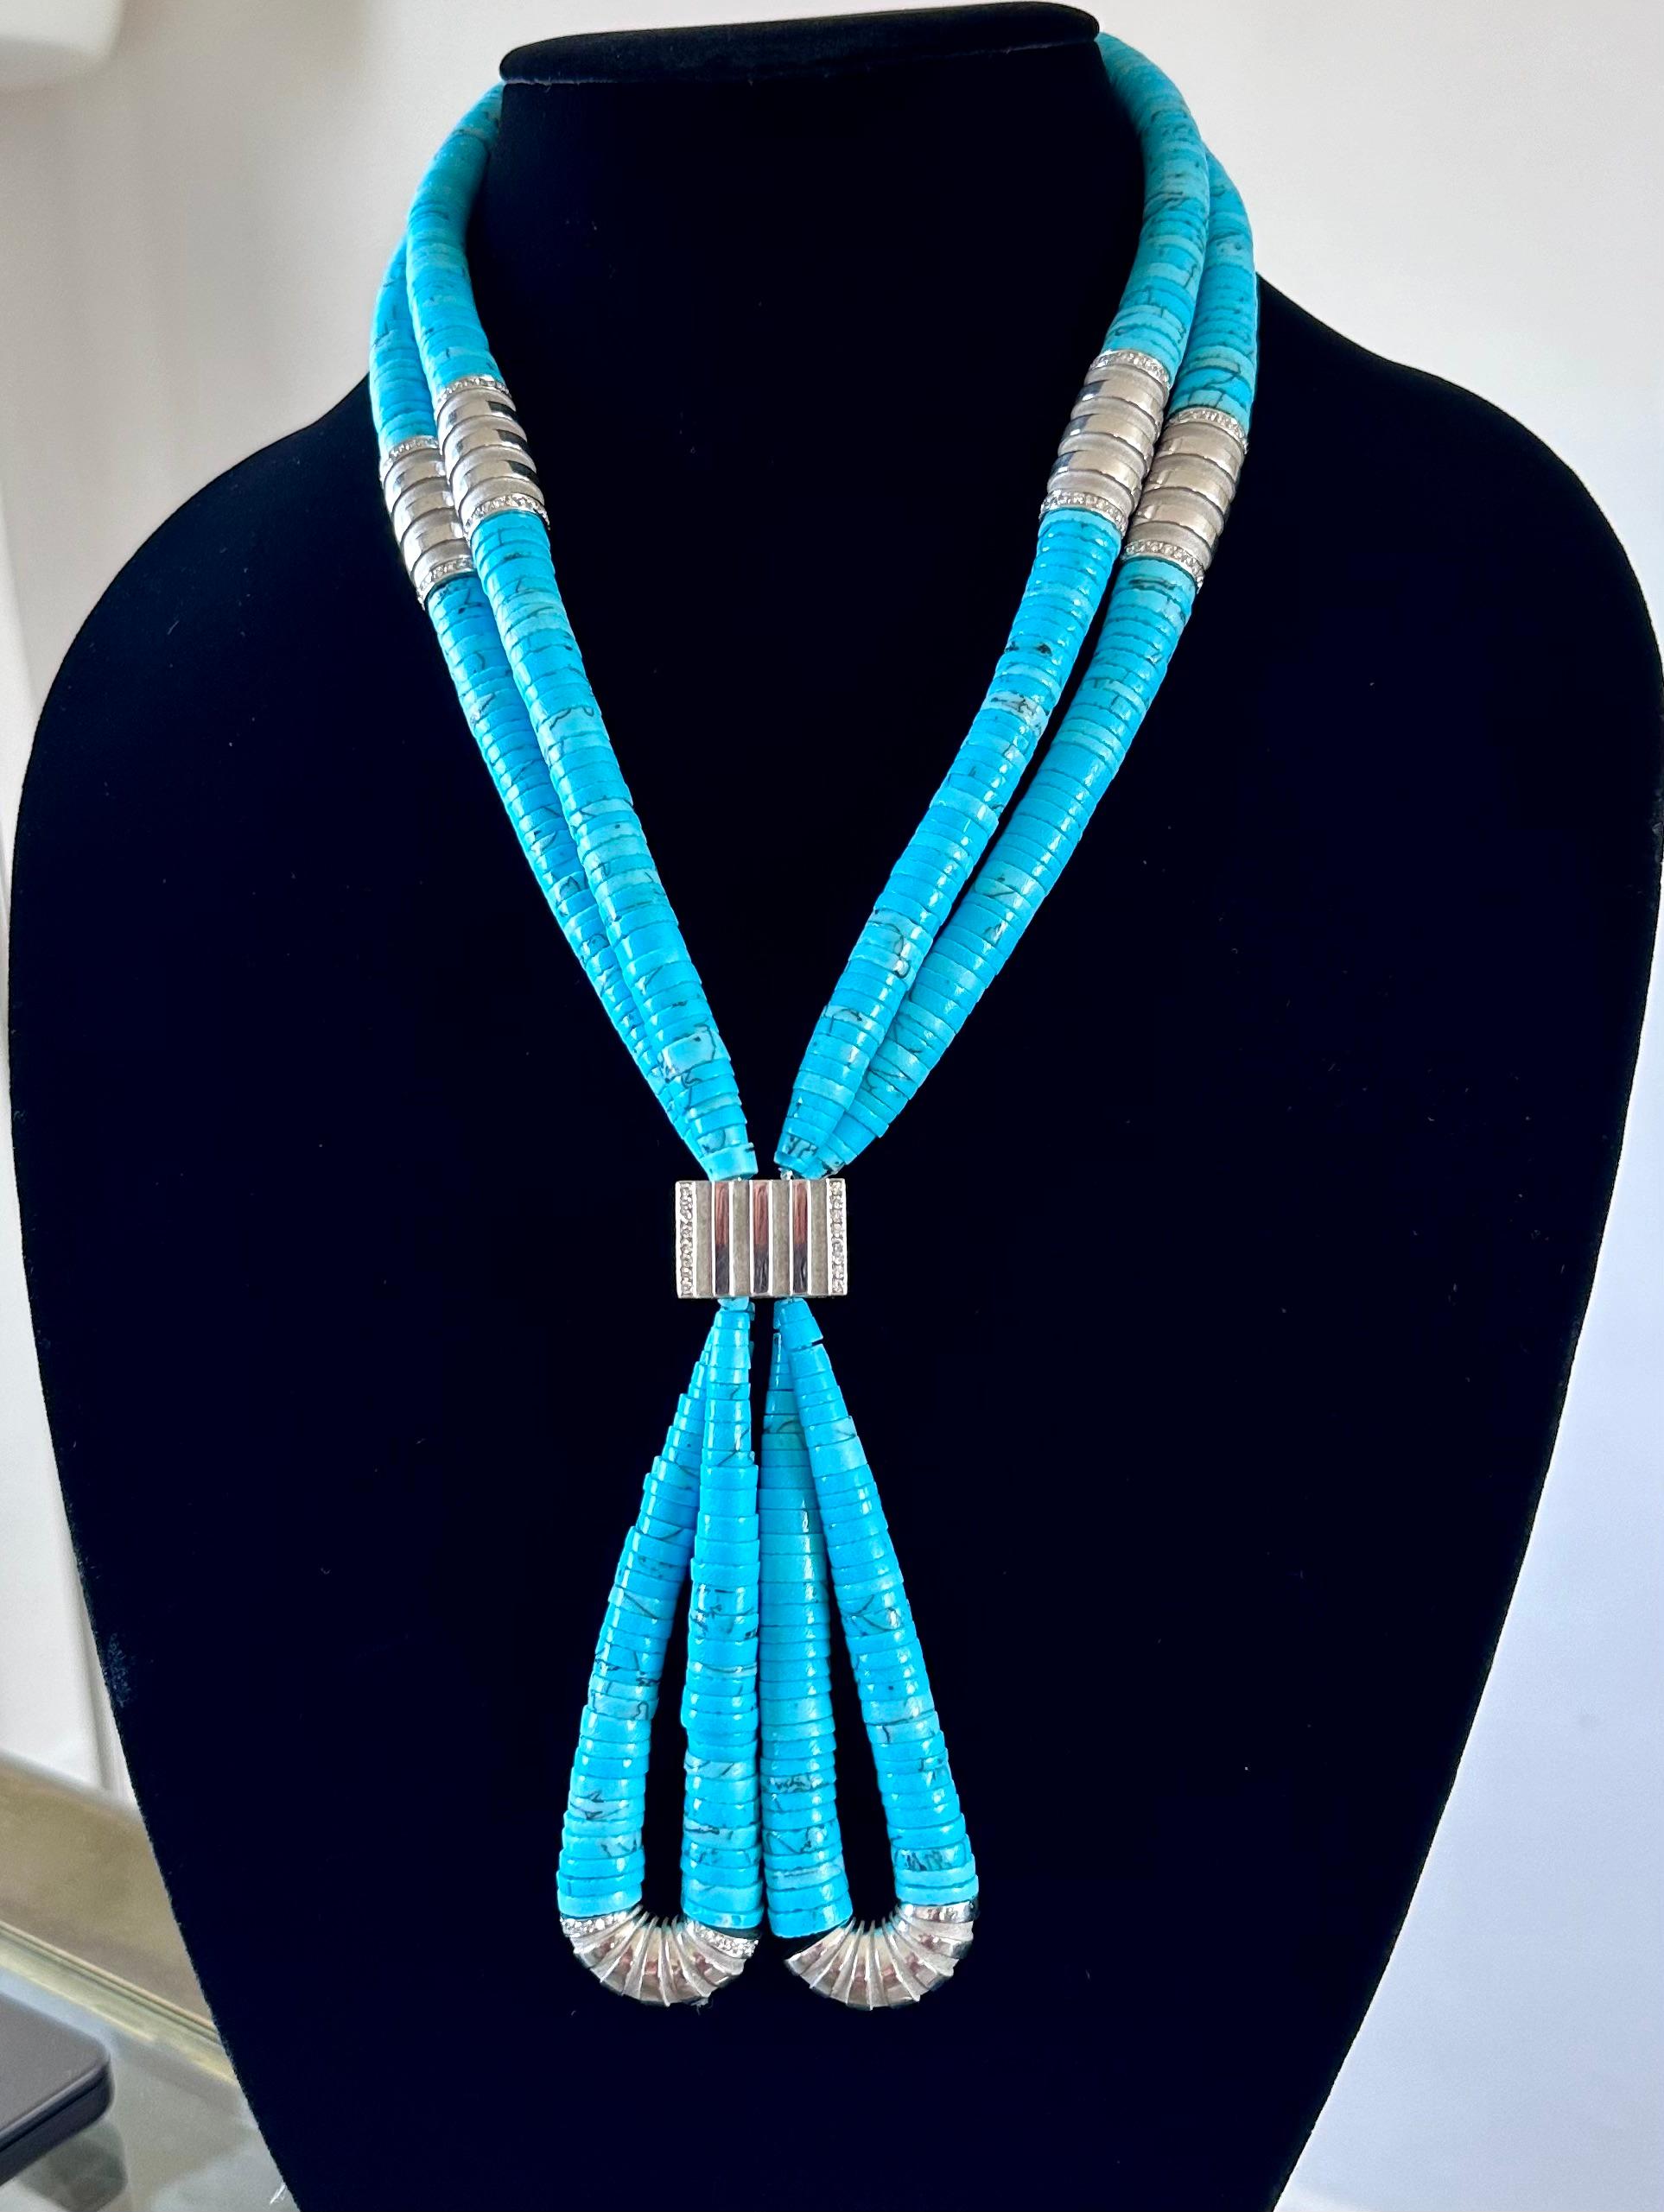 Statement Necklace by Mauboussin
18K White Gold & Diamonds
Mauboussin 'Nadja' Turquoise Diamond 18k White Gold Necklace. 
The Nadja necklace is designed as two strands of natural turquoise beads accented by fluted white gold elements  polished with